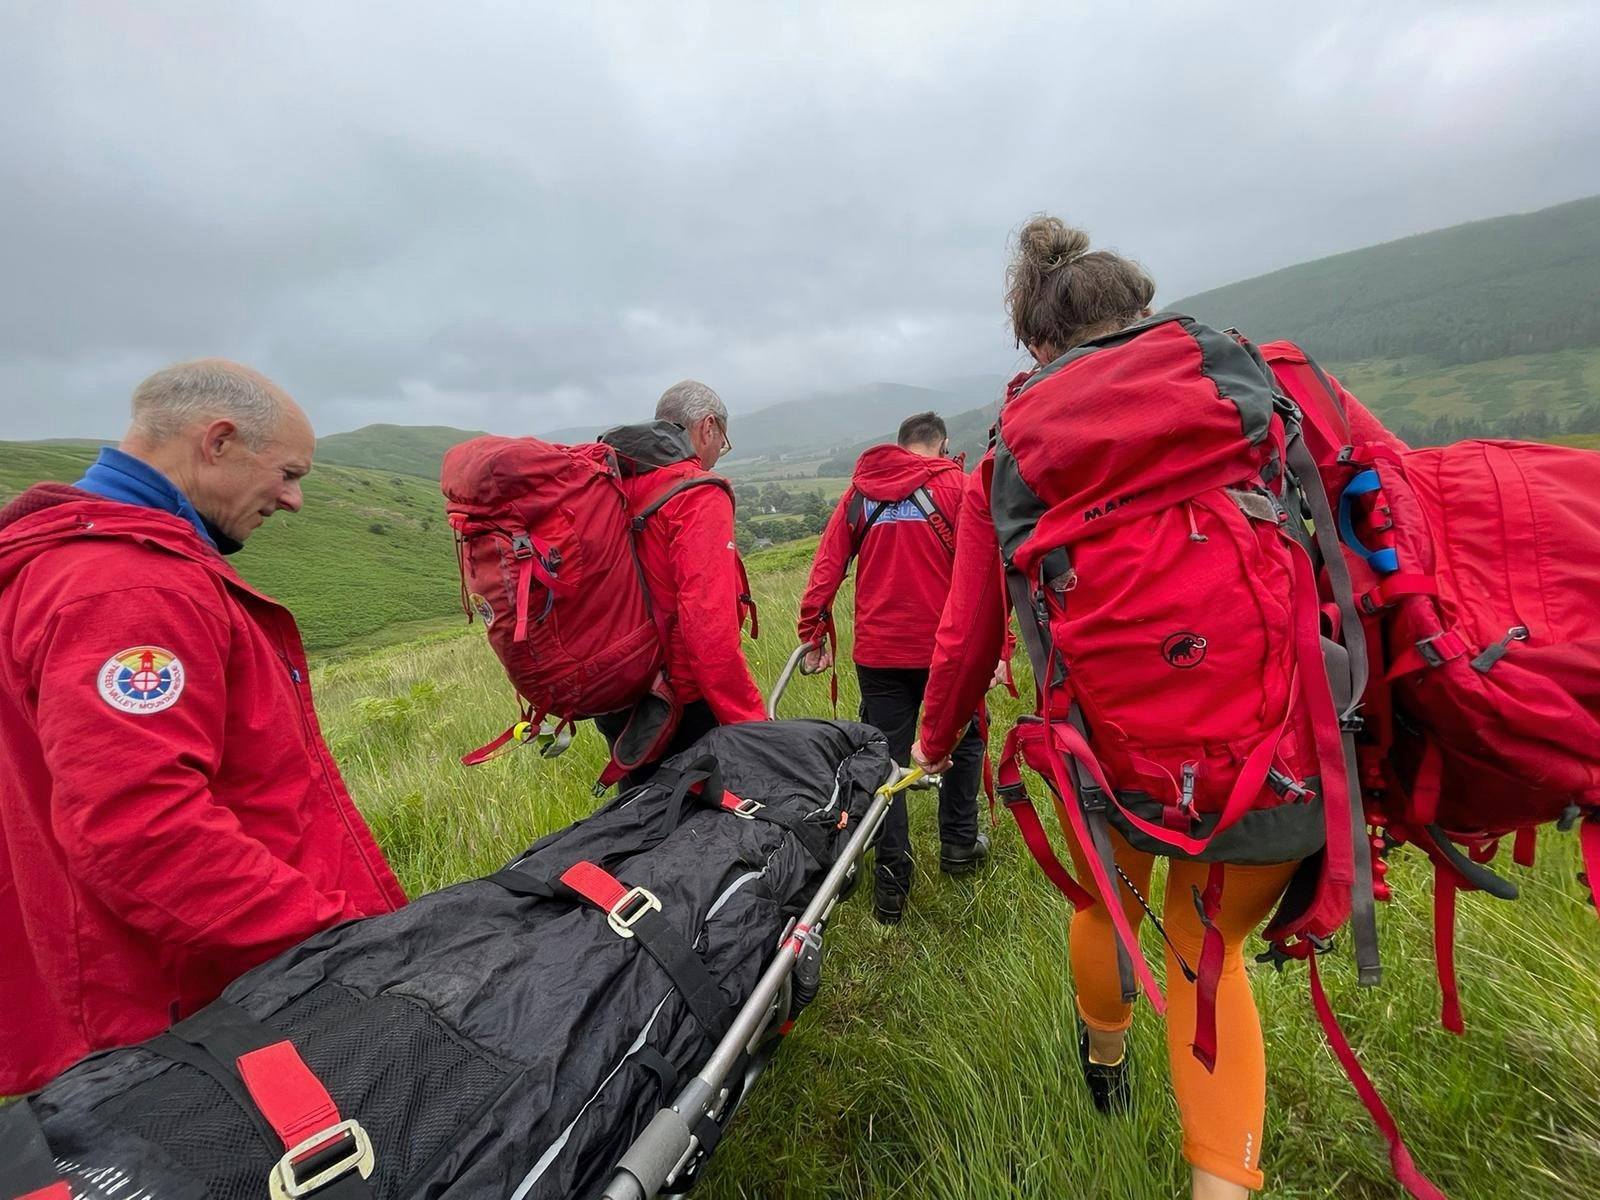 Tweed Valley Mountain Rescue members were able to move the hillwalker to an ambulance on a stretcher. 